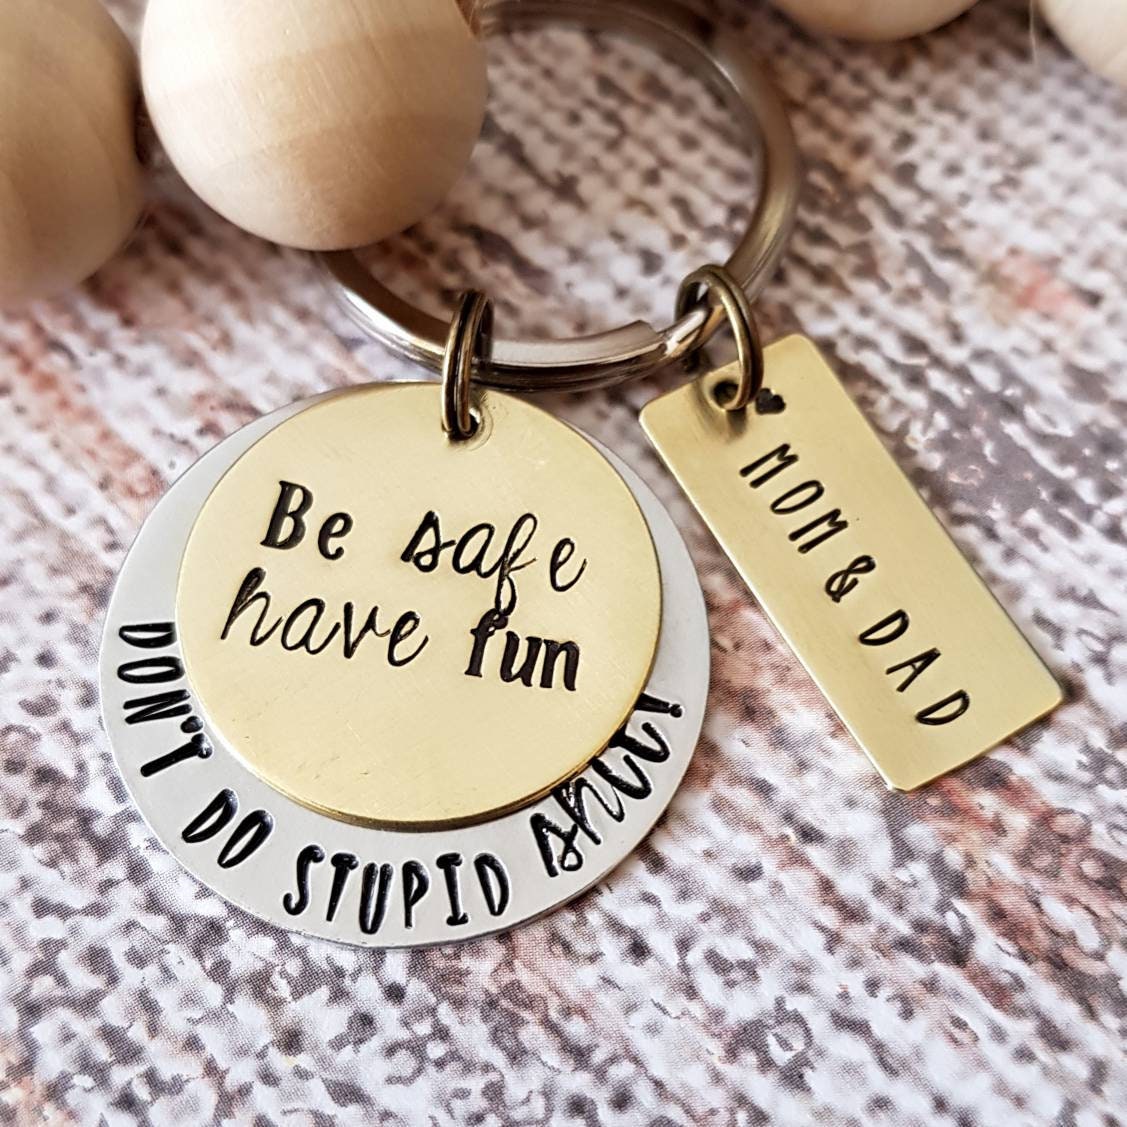 Don't do Stupid Shit Wood keychain, Love Mom, Graduation Gift, Gift fo –  Etched Market